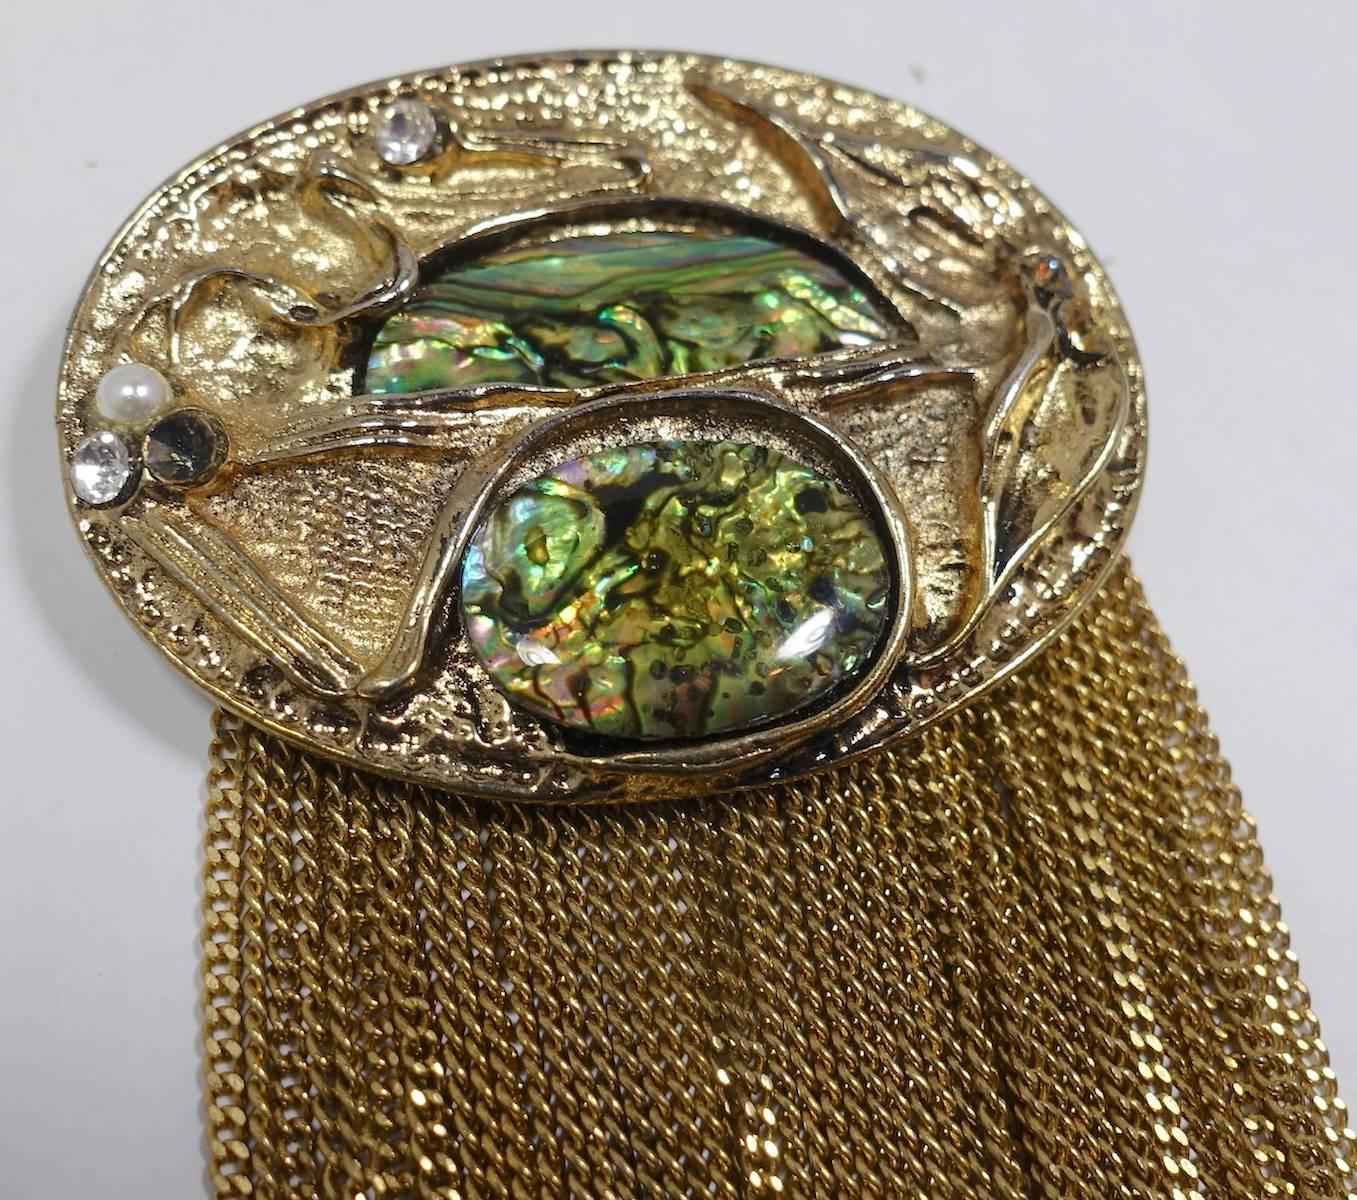 This stunning brutalist design brooch features abalone accents with gold tone chain tassels in a heavily carved bronze tone metal setting.  In excellent condition, this brooch measures 3-5/8” x 2” with a c-pin closure.